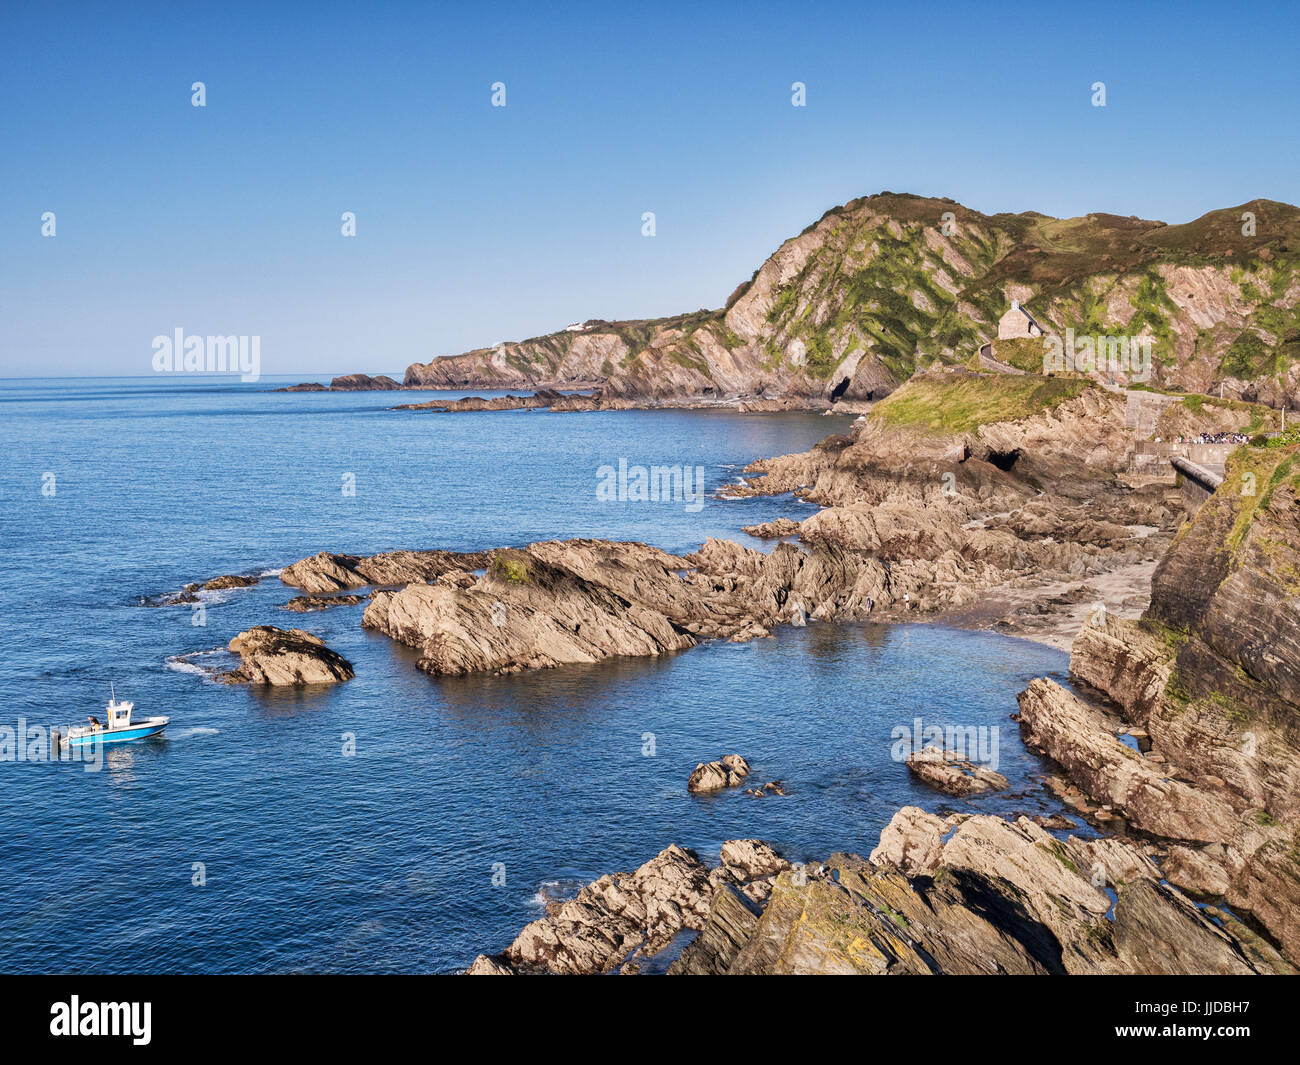 17 June 2017: Ilfracombe, North Devon, England, UK - Ilfracombe from Capstone Hill, with Lantern Hill and Hillsborough Hill, and a boat making its way Stock Photo